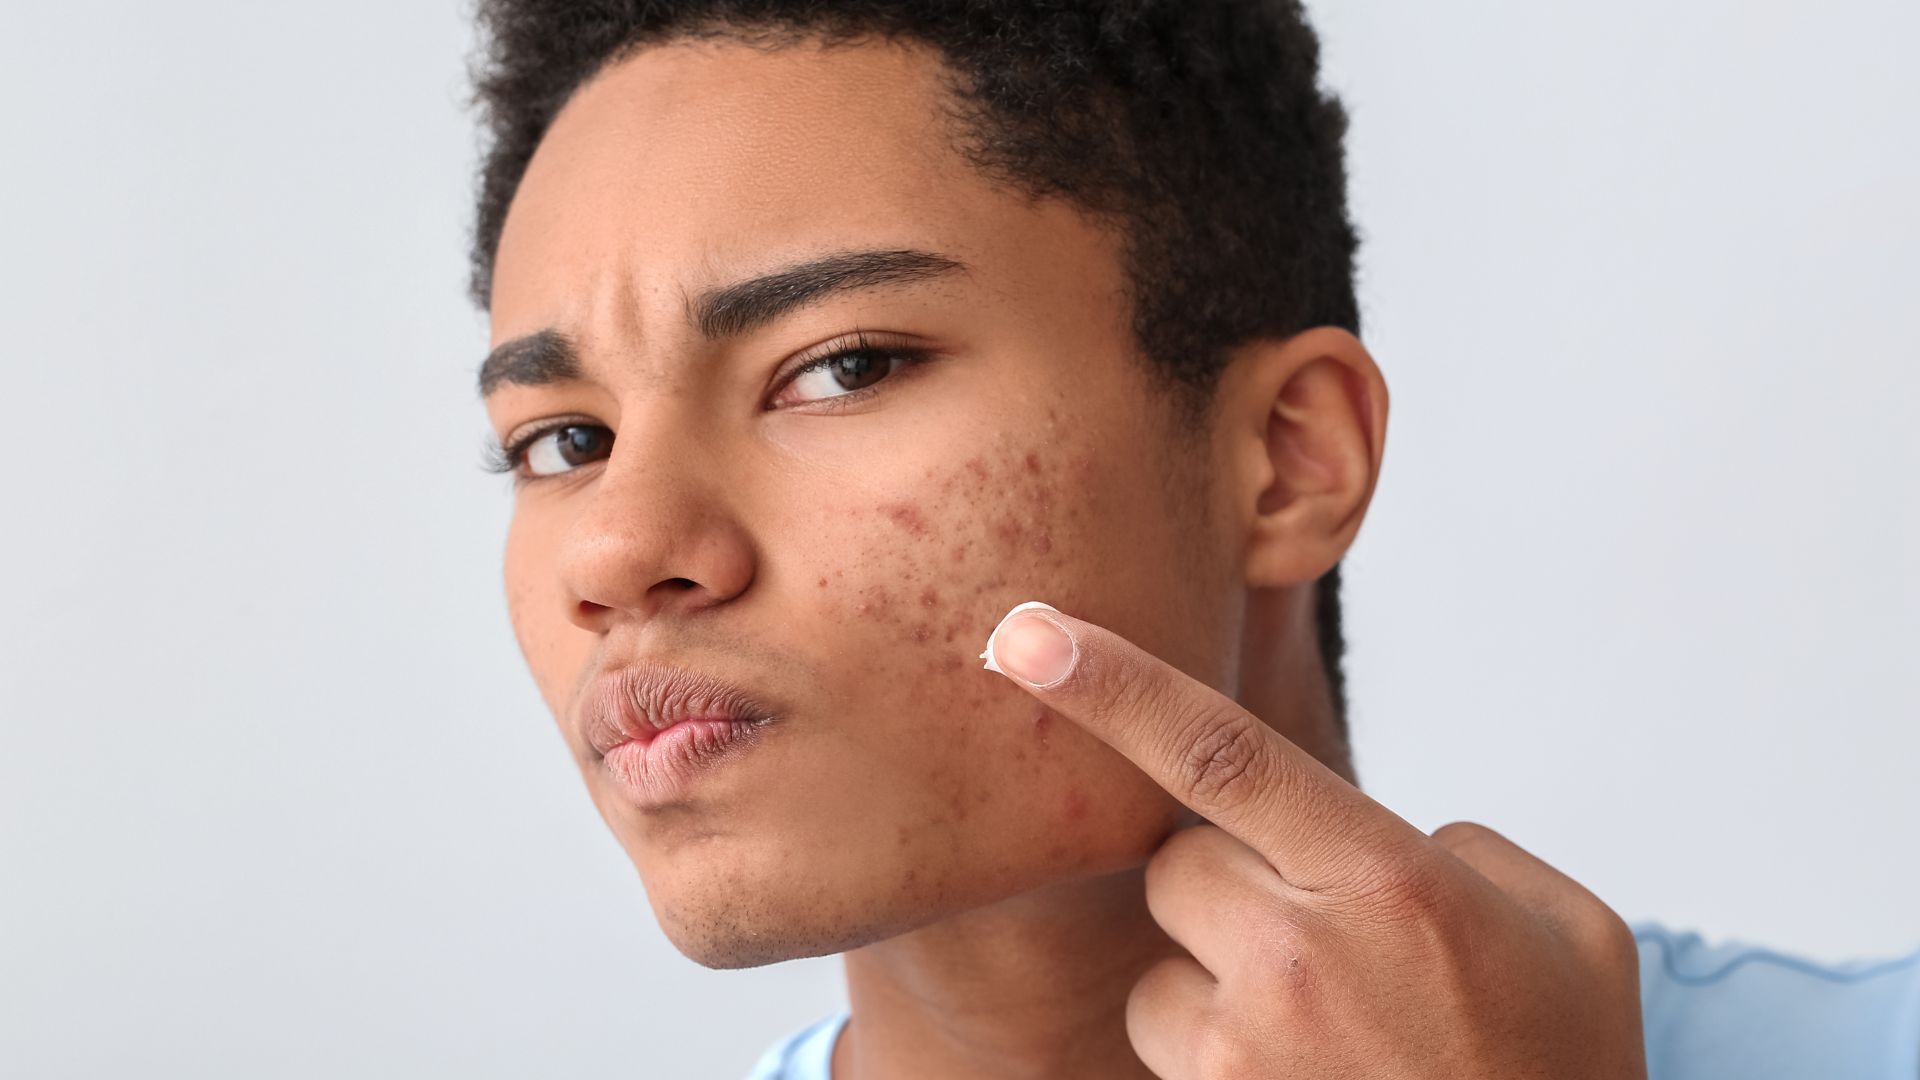 The Top 5 Natural Ingredients for Fighting Blemishes and Acne